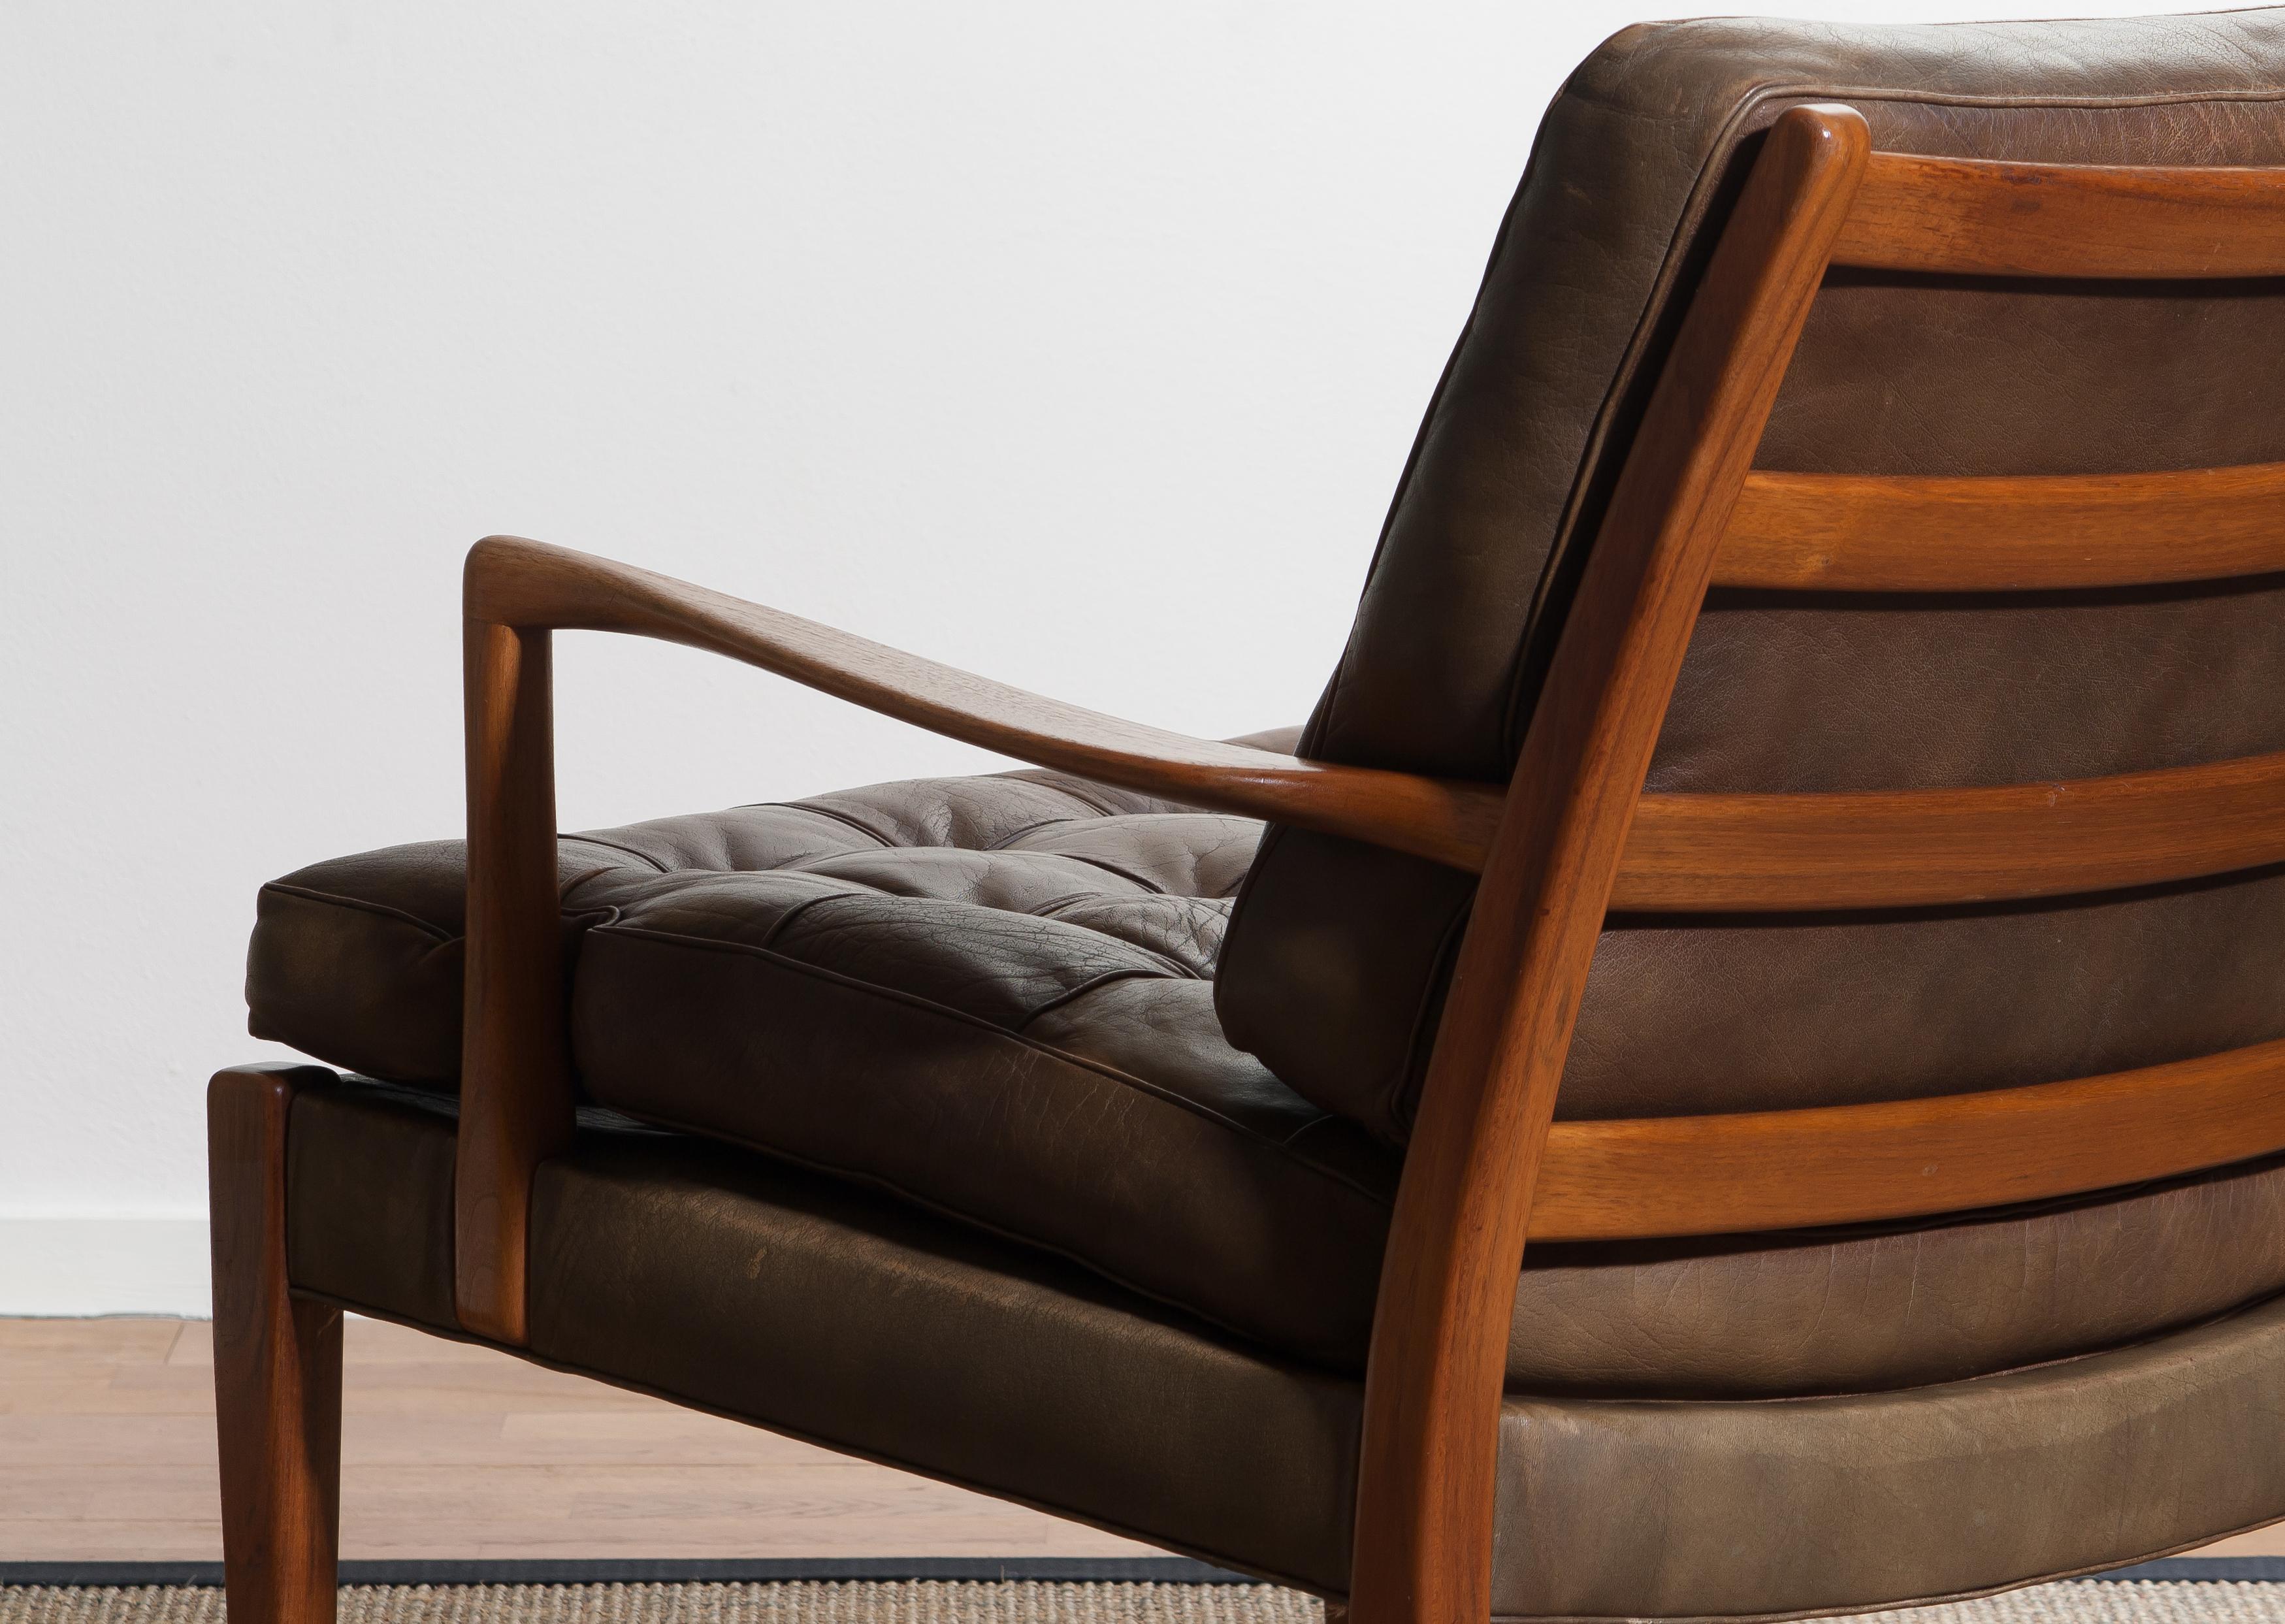 Pair of Leather Easy or Lounge Chairs Model 